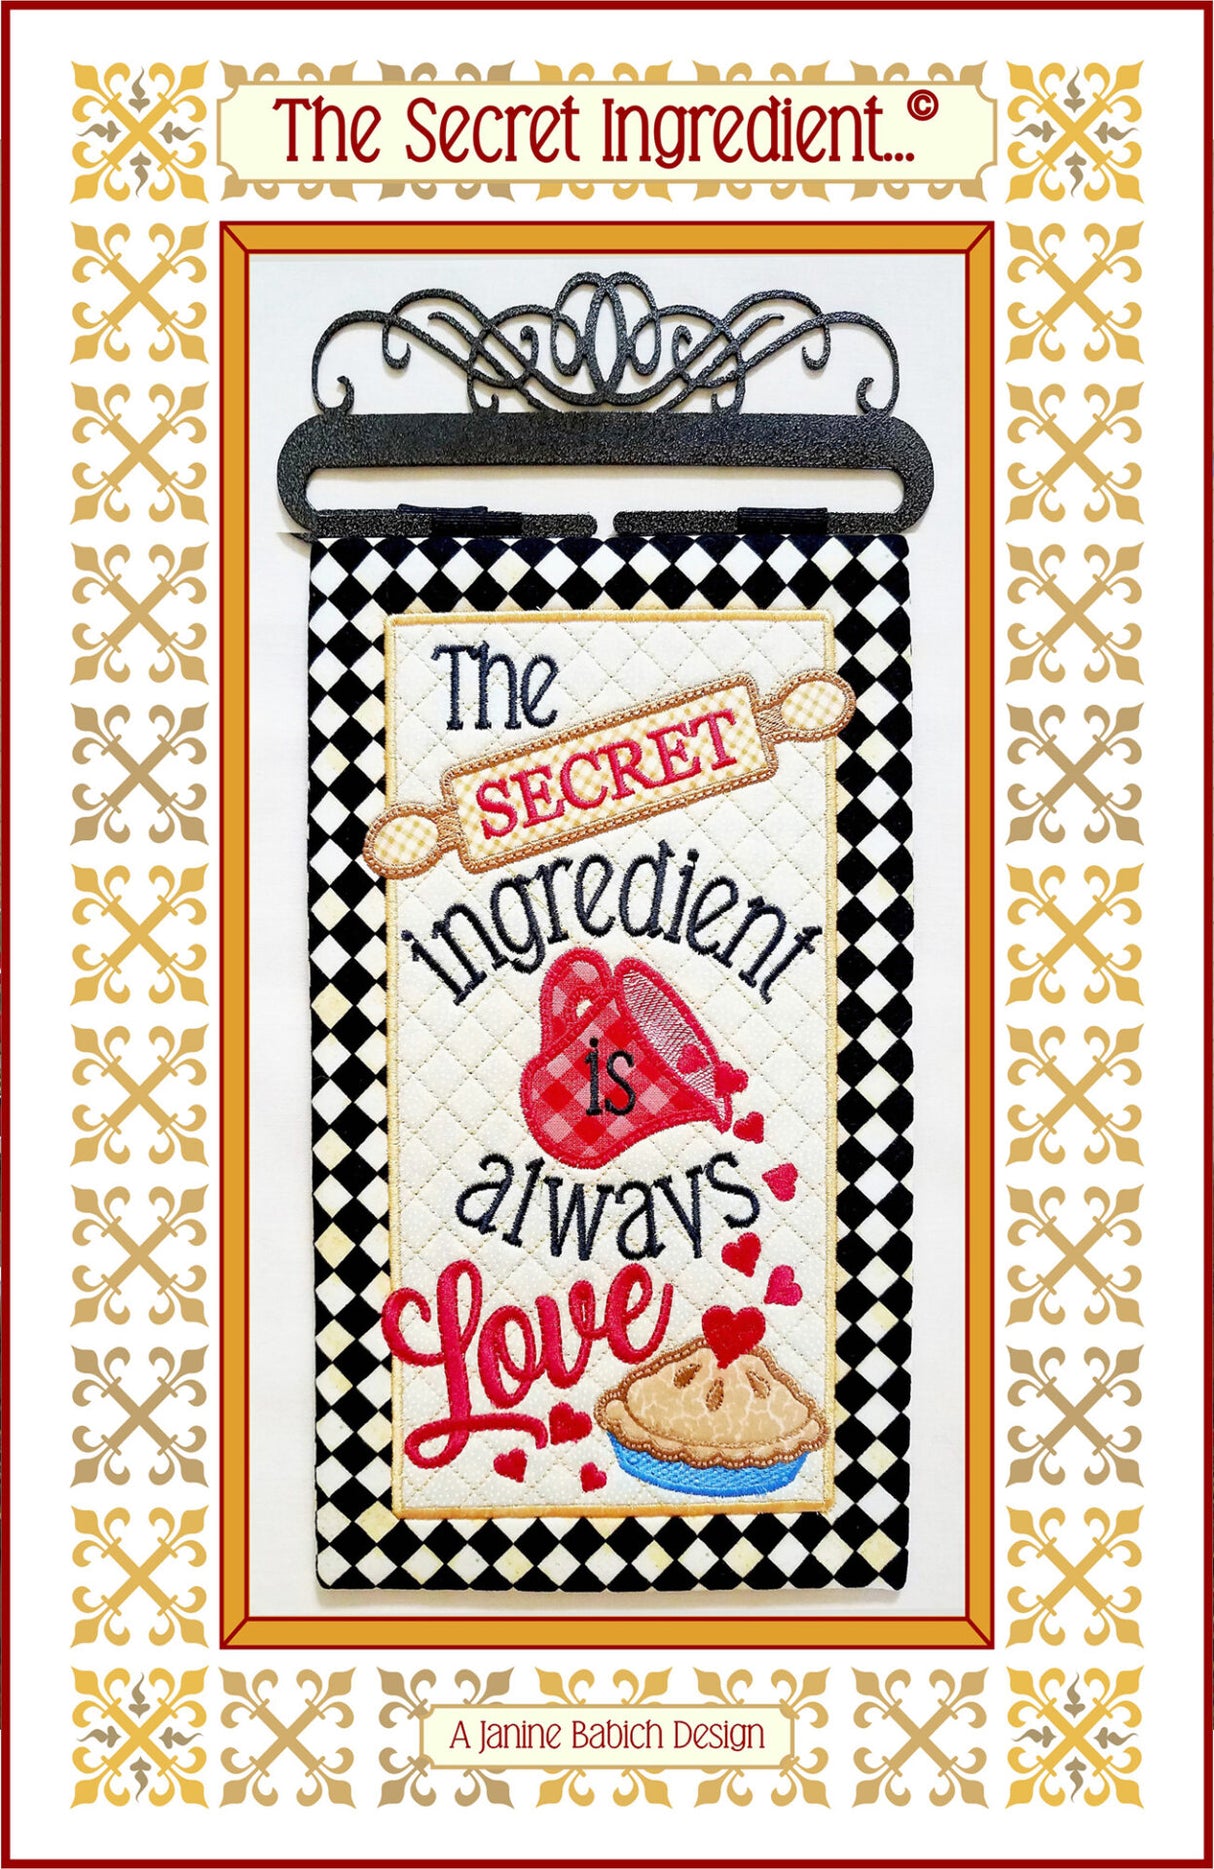 The Secret Ingredient Table Top Display Downloadable Pattern by Janine Babich